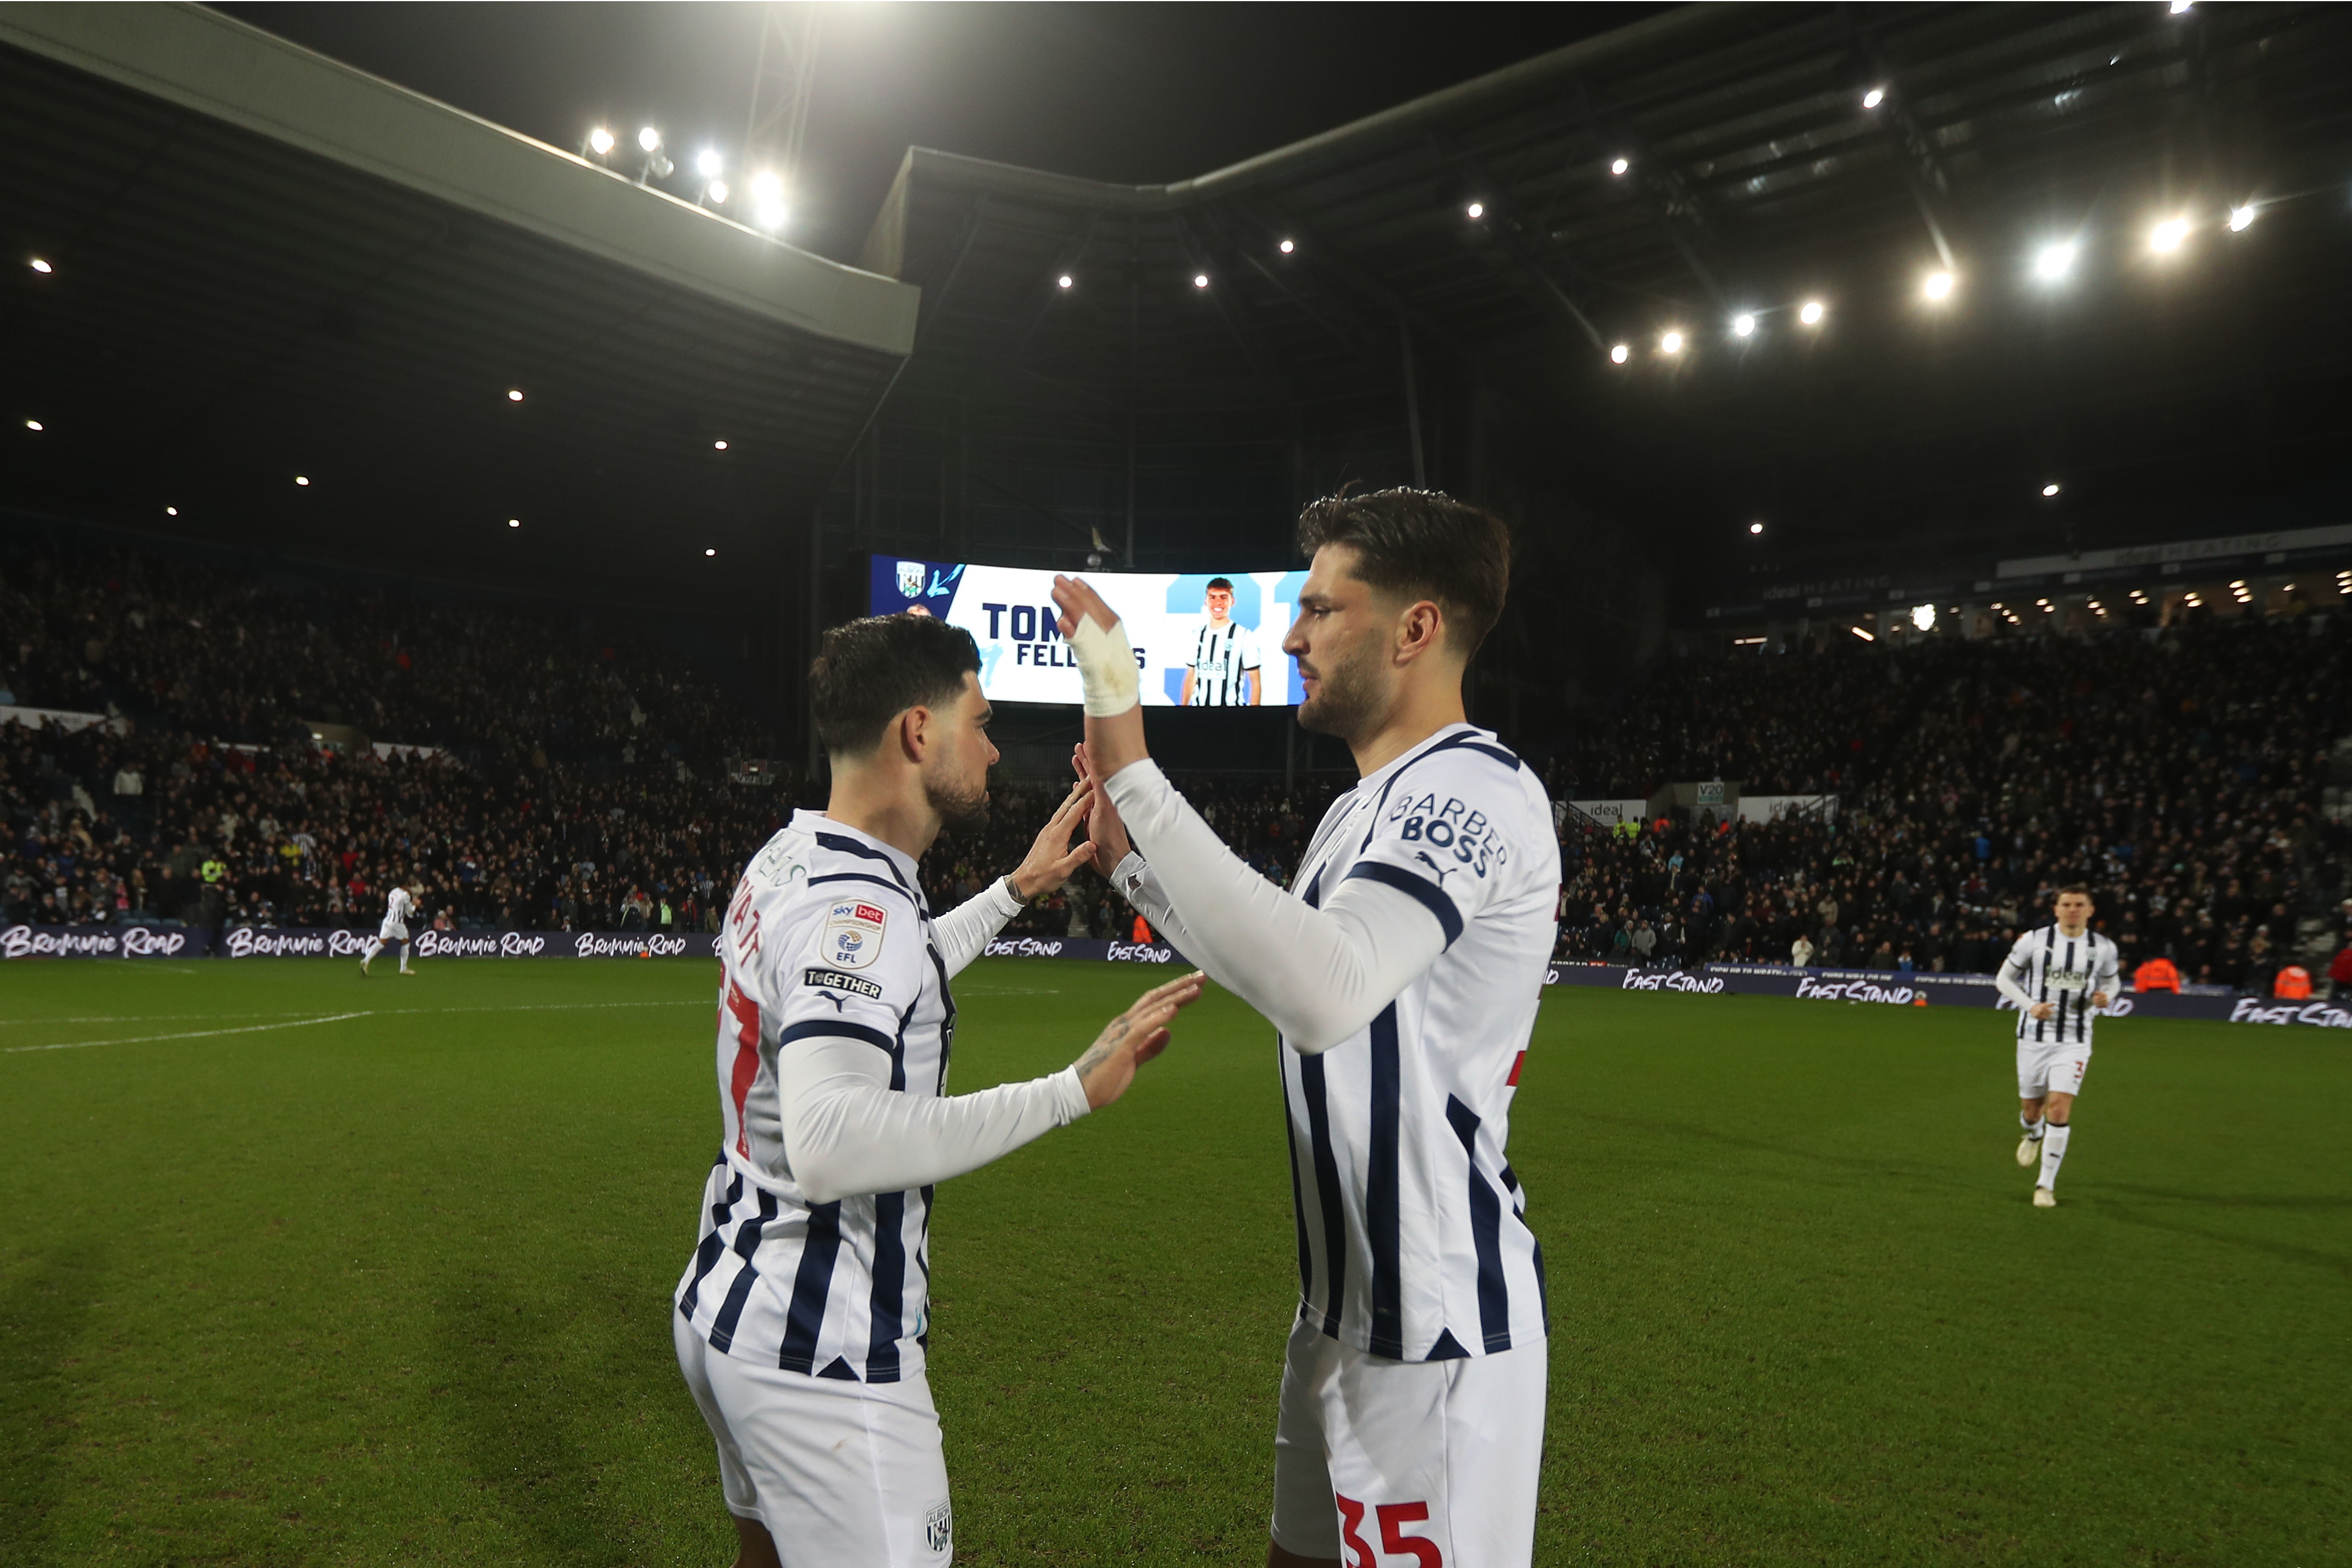 Alex Mowatt and Okay Yokuslu high five each other before playing Coventry 